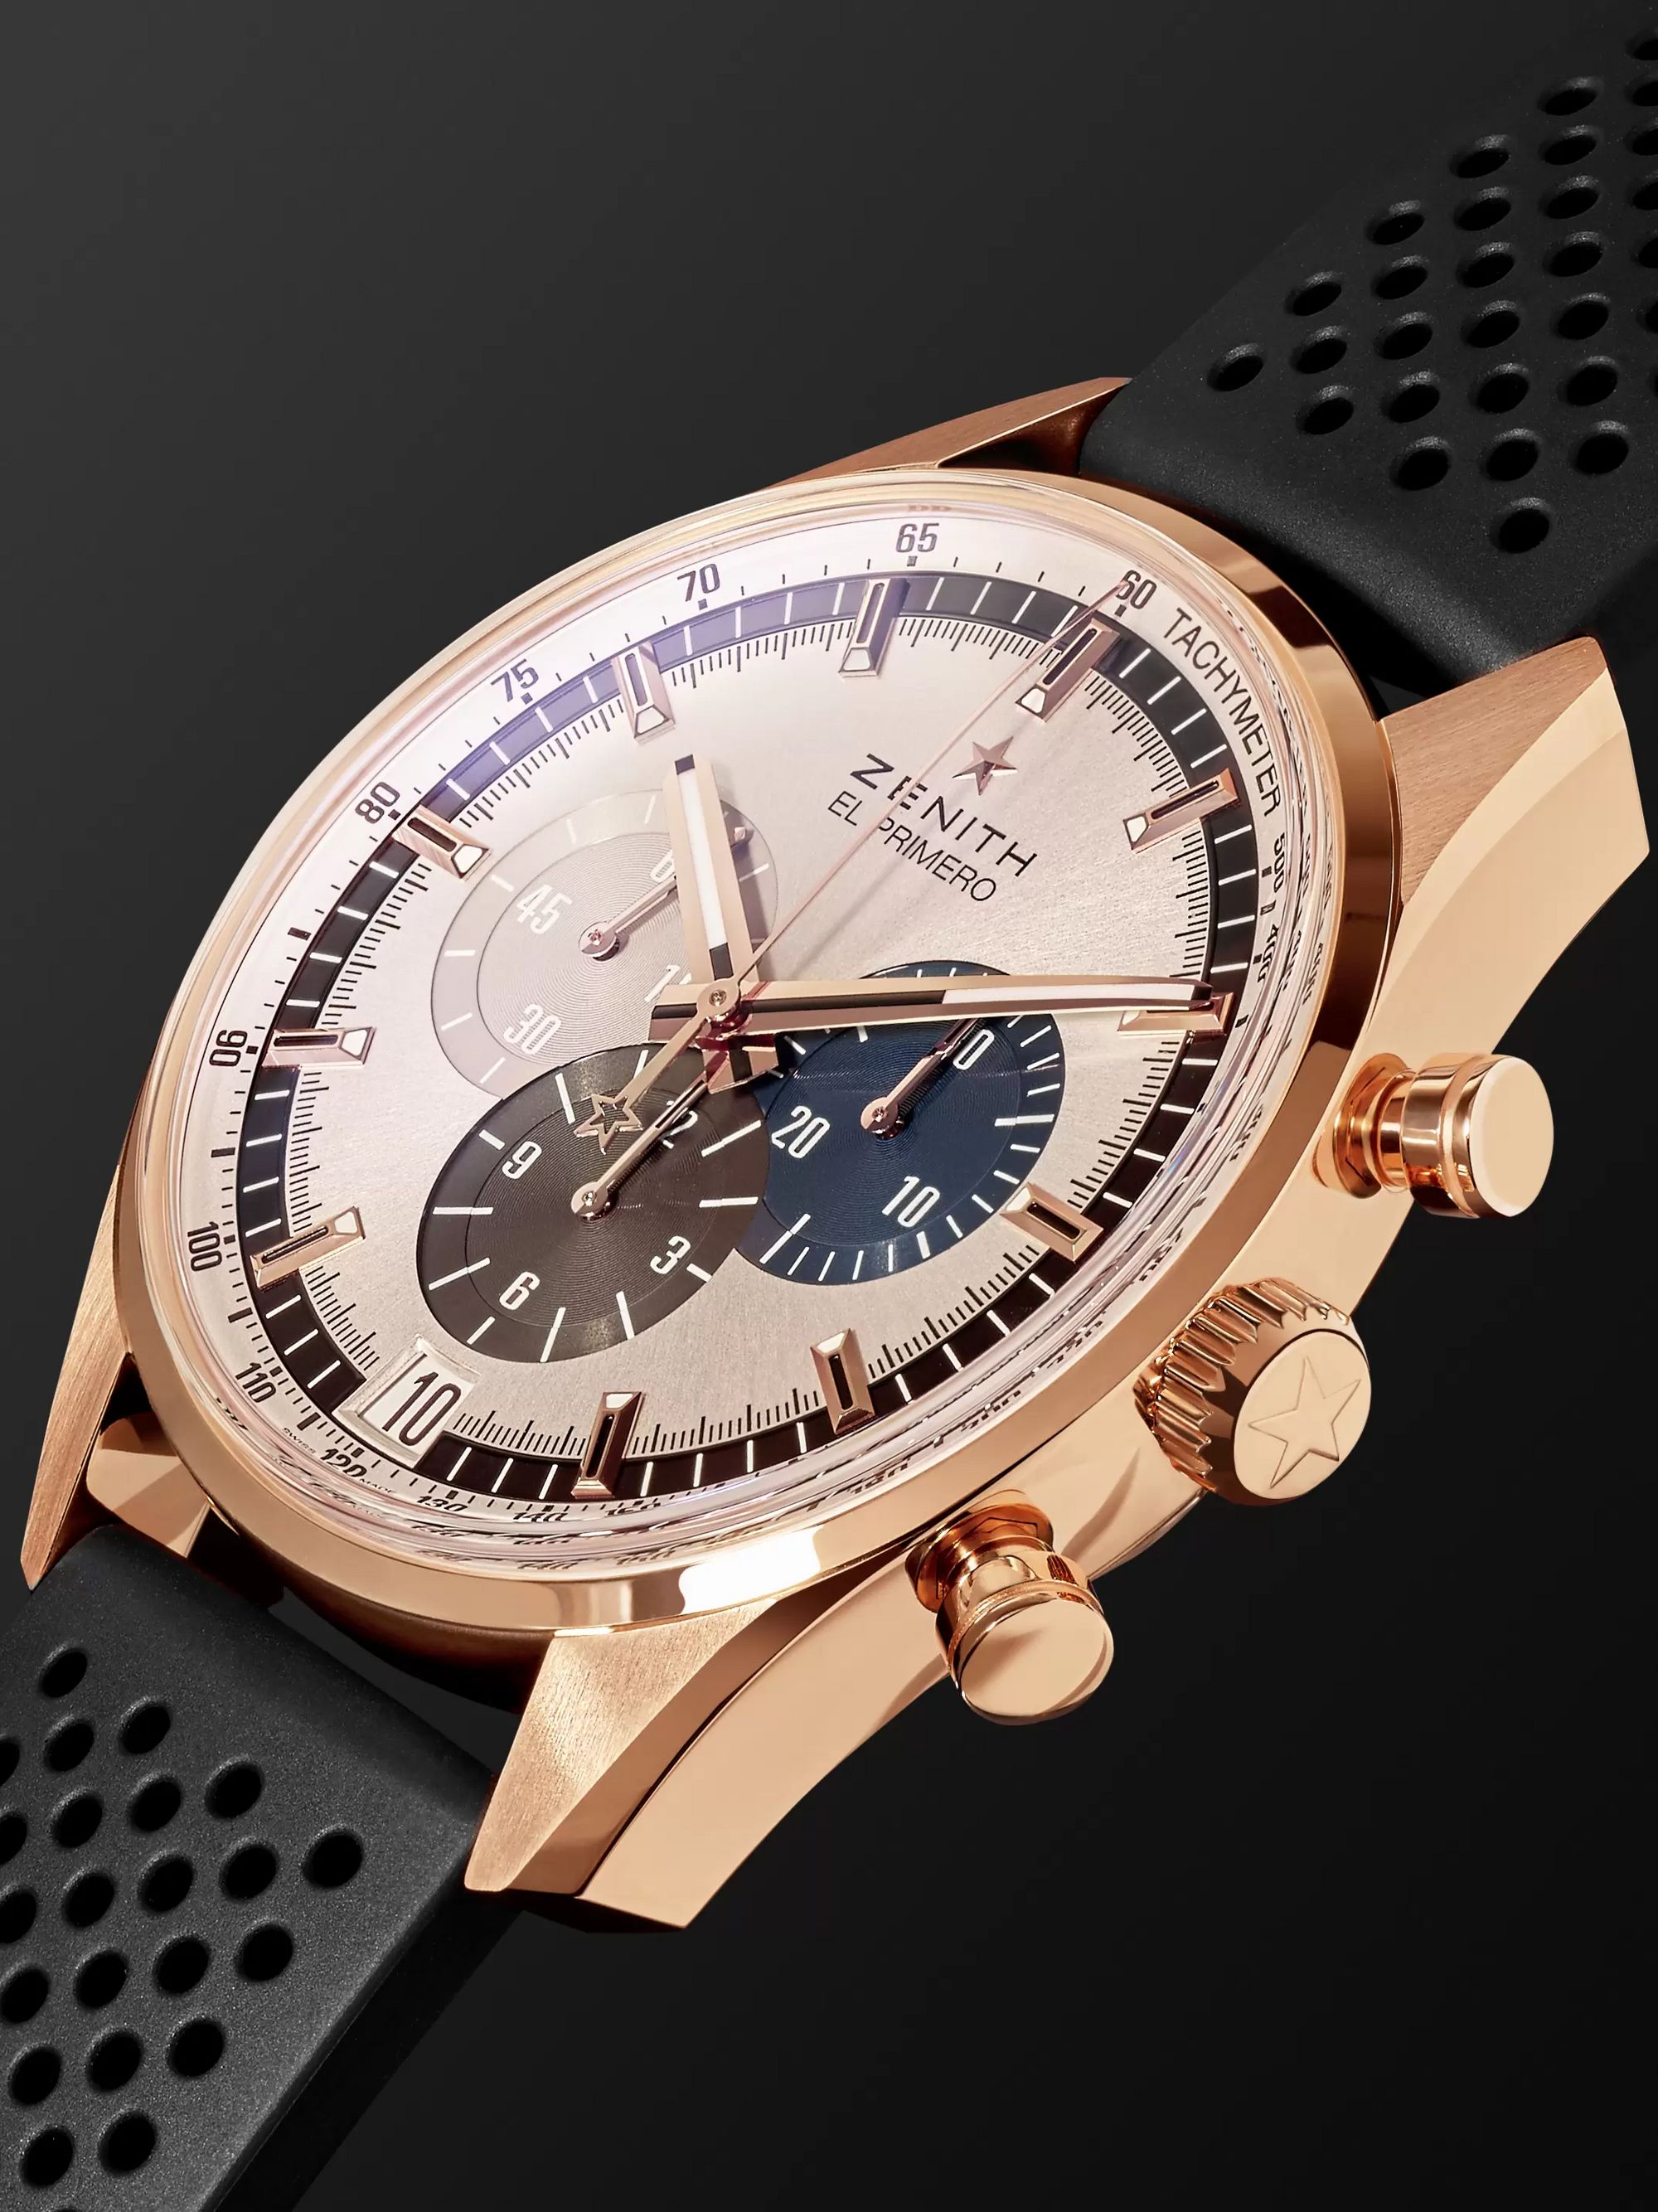 ZENITH El Primero Chronomaster 1969 42mm Rose Gold and Rubber Watch, Ref. No. 18.2043.400/69.R576